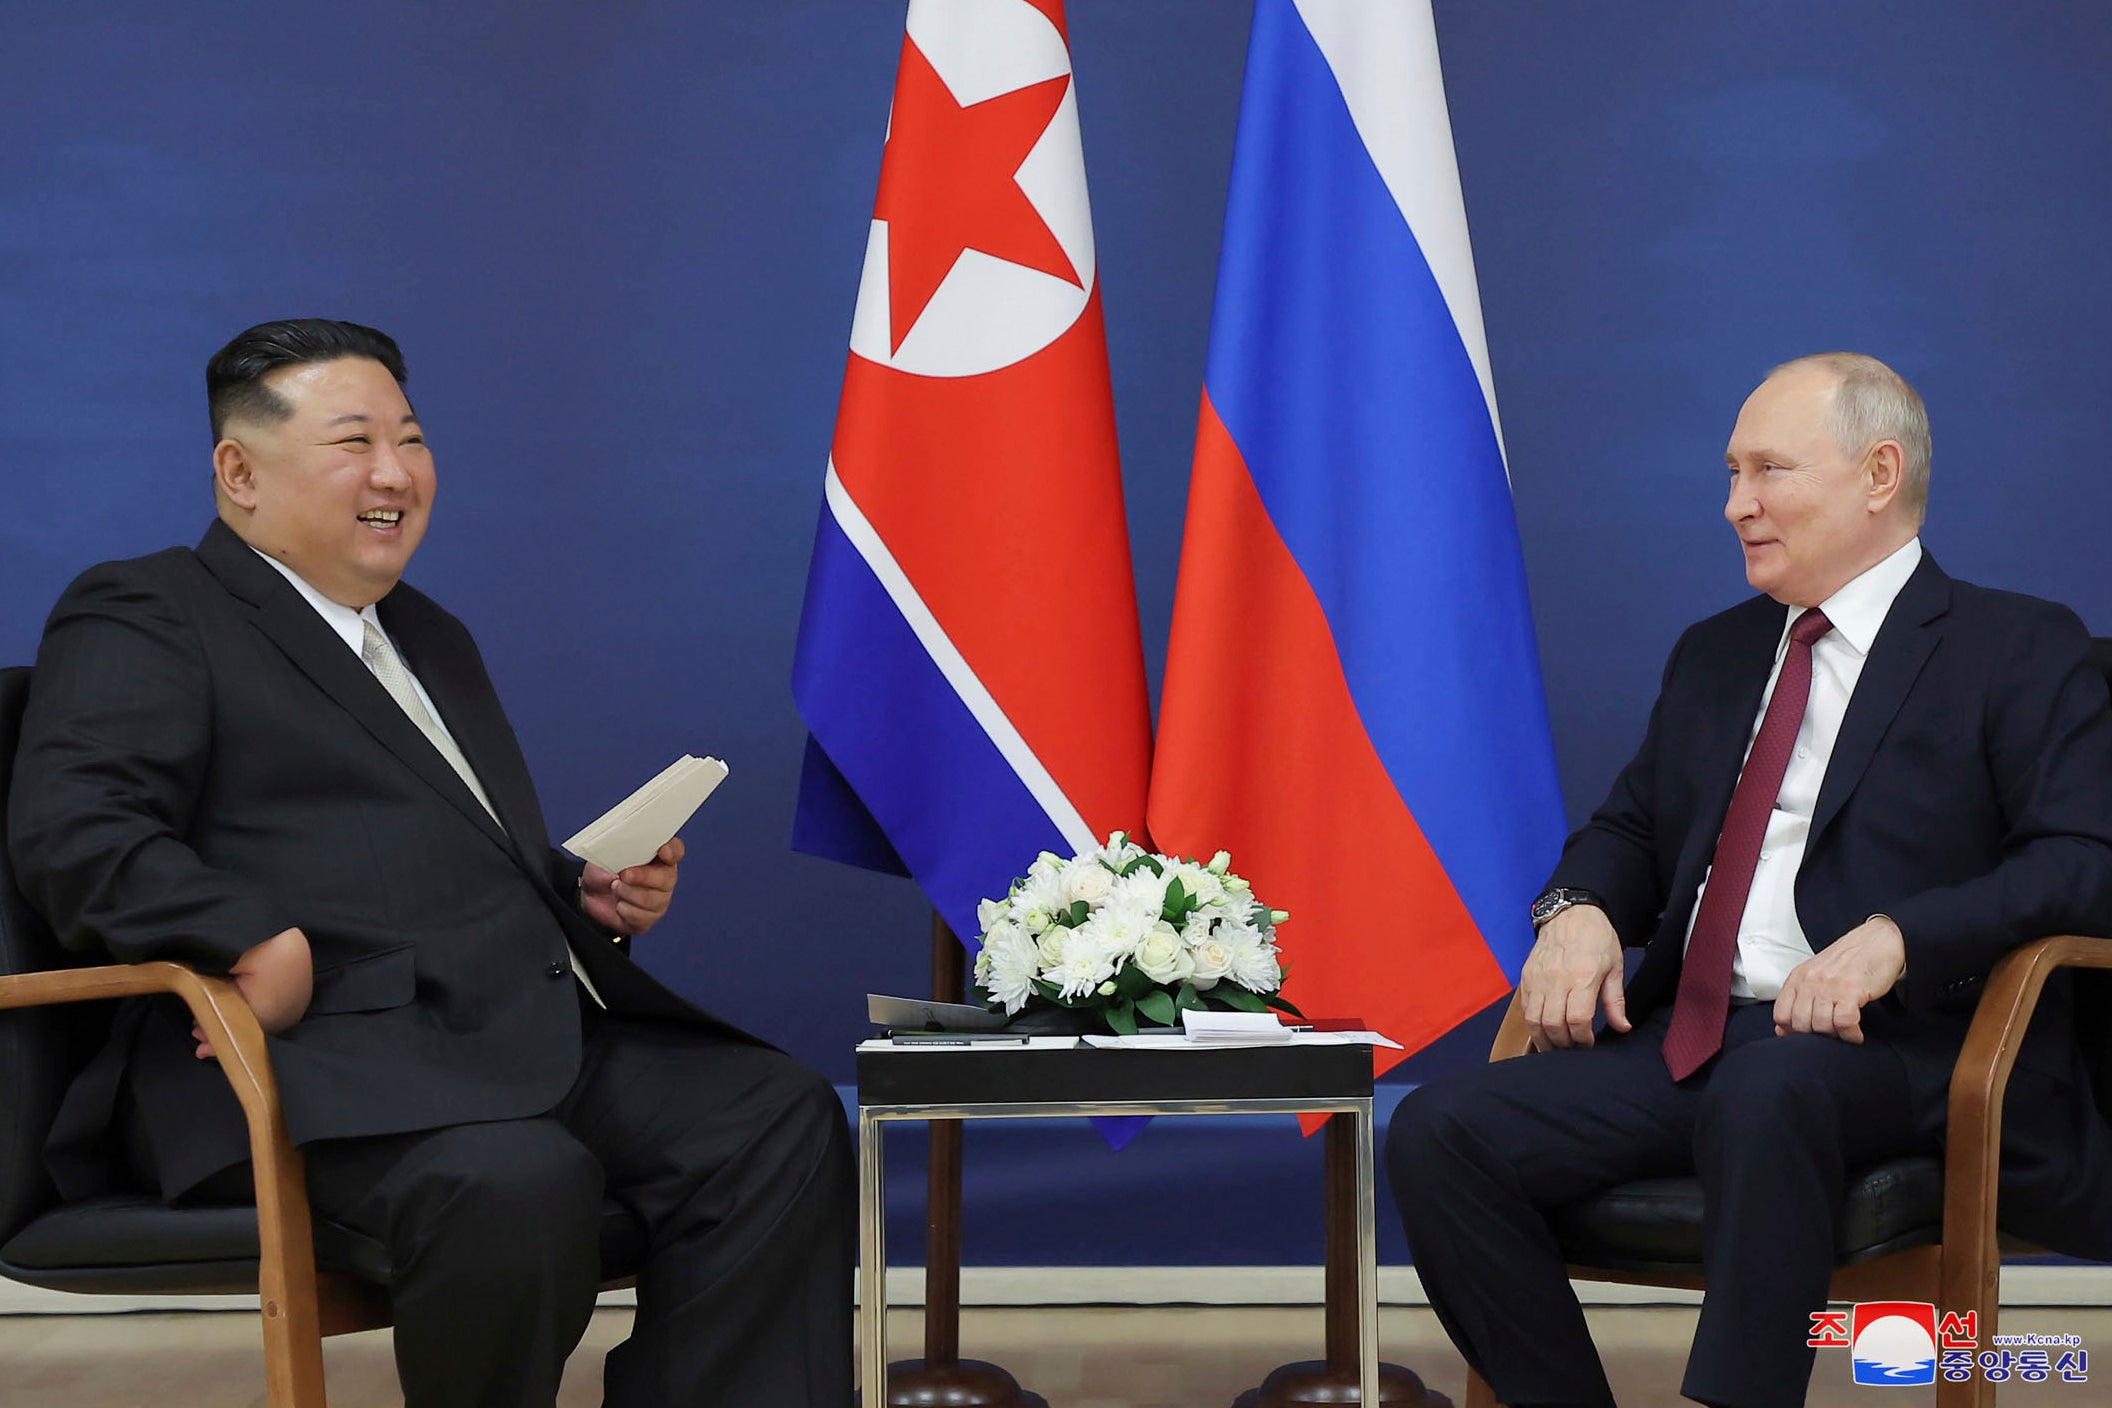 North Korean leader Kim Jong-un, and Russian president Vladimir Putin talk at the Vostochny cosmodrome outside the city of Tsiolkovsky, about 200 kilometers (125 miles) from the city of Blagoveshchensk in the far eastern Amur region, Russia, on 13 September 2023